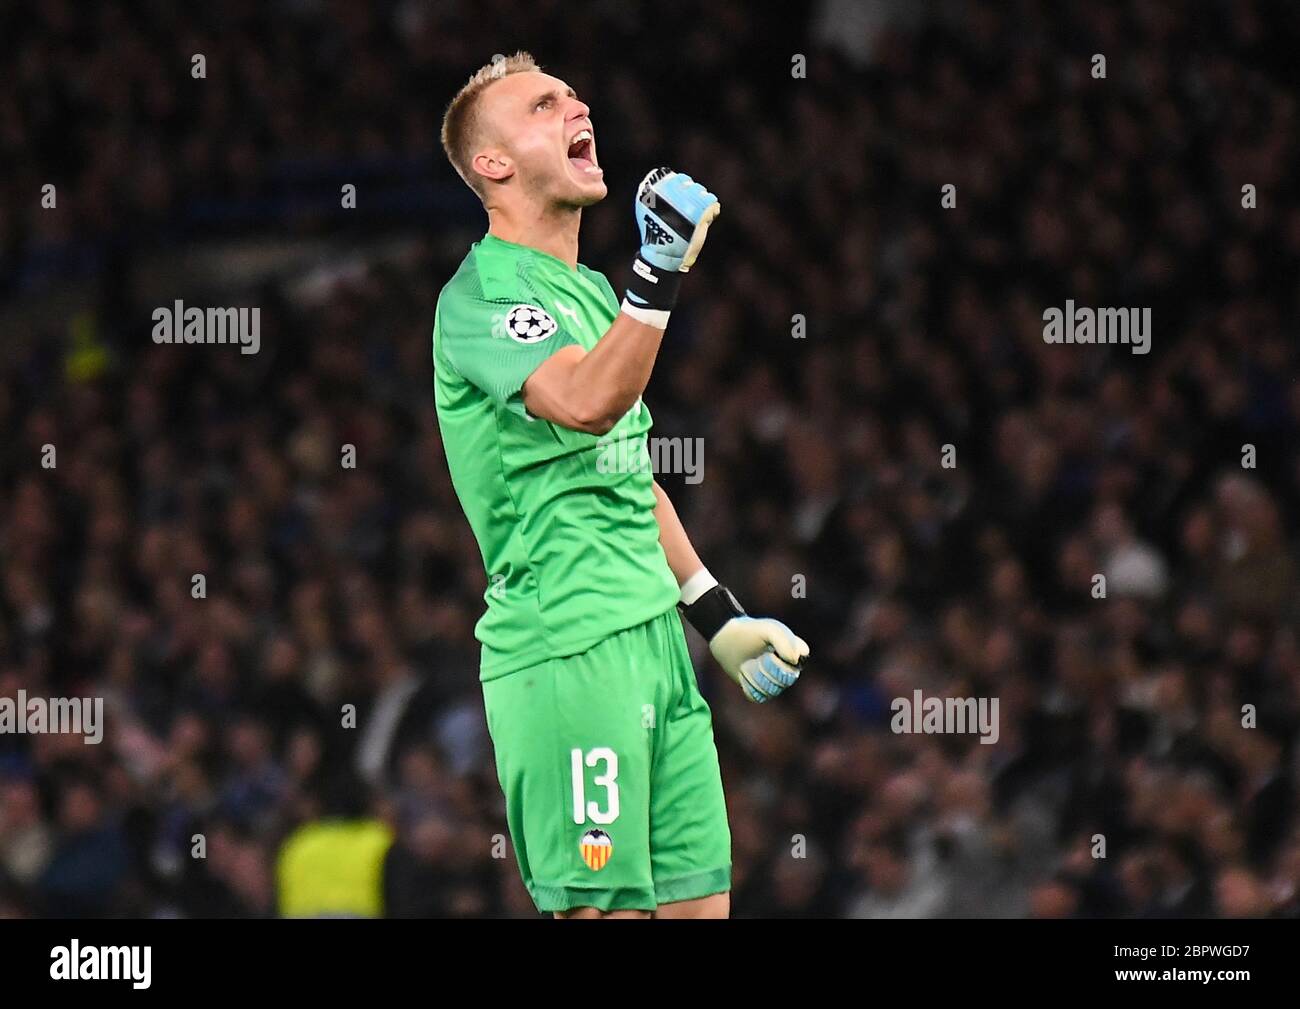 LONDON, ENGLAND - SEPTEMBER 17, 2019: Jasper Cillessen of Valencia celebrates after a goal scored by Rodrigo Moreno Machado of Valencia (not in the picture) during the 2019/20 UEFA Champions League Group H game between Chelsea FC (England) and Valencia CF (Spain) at Stamford Bridge. Stock Photo